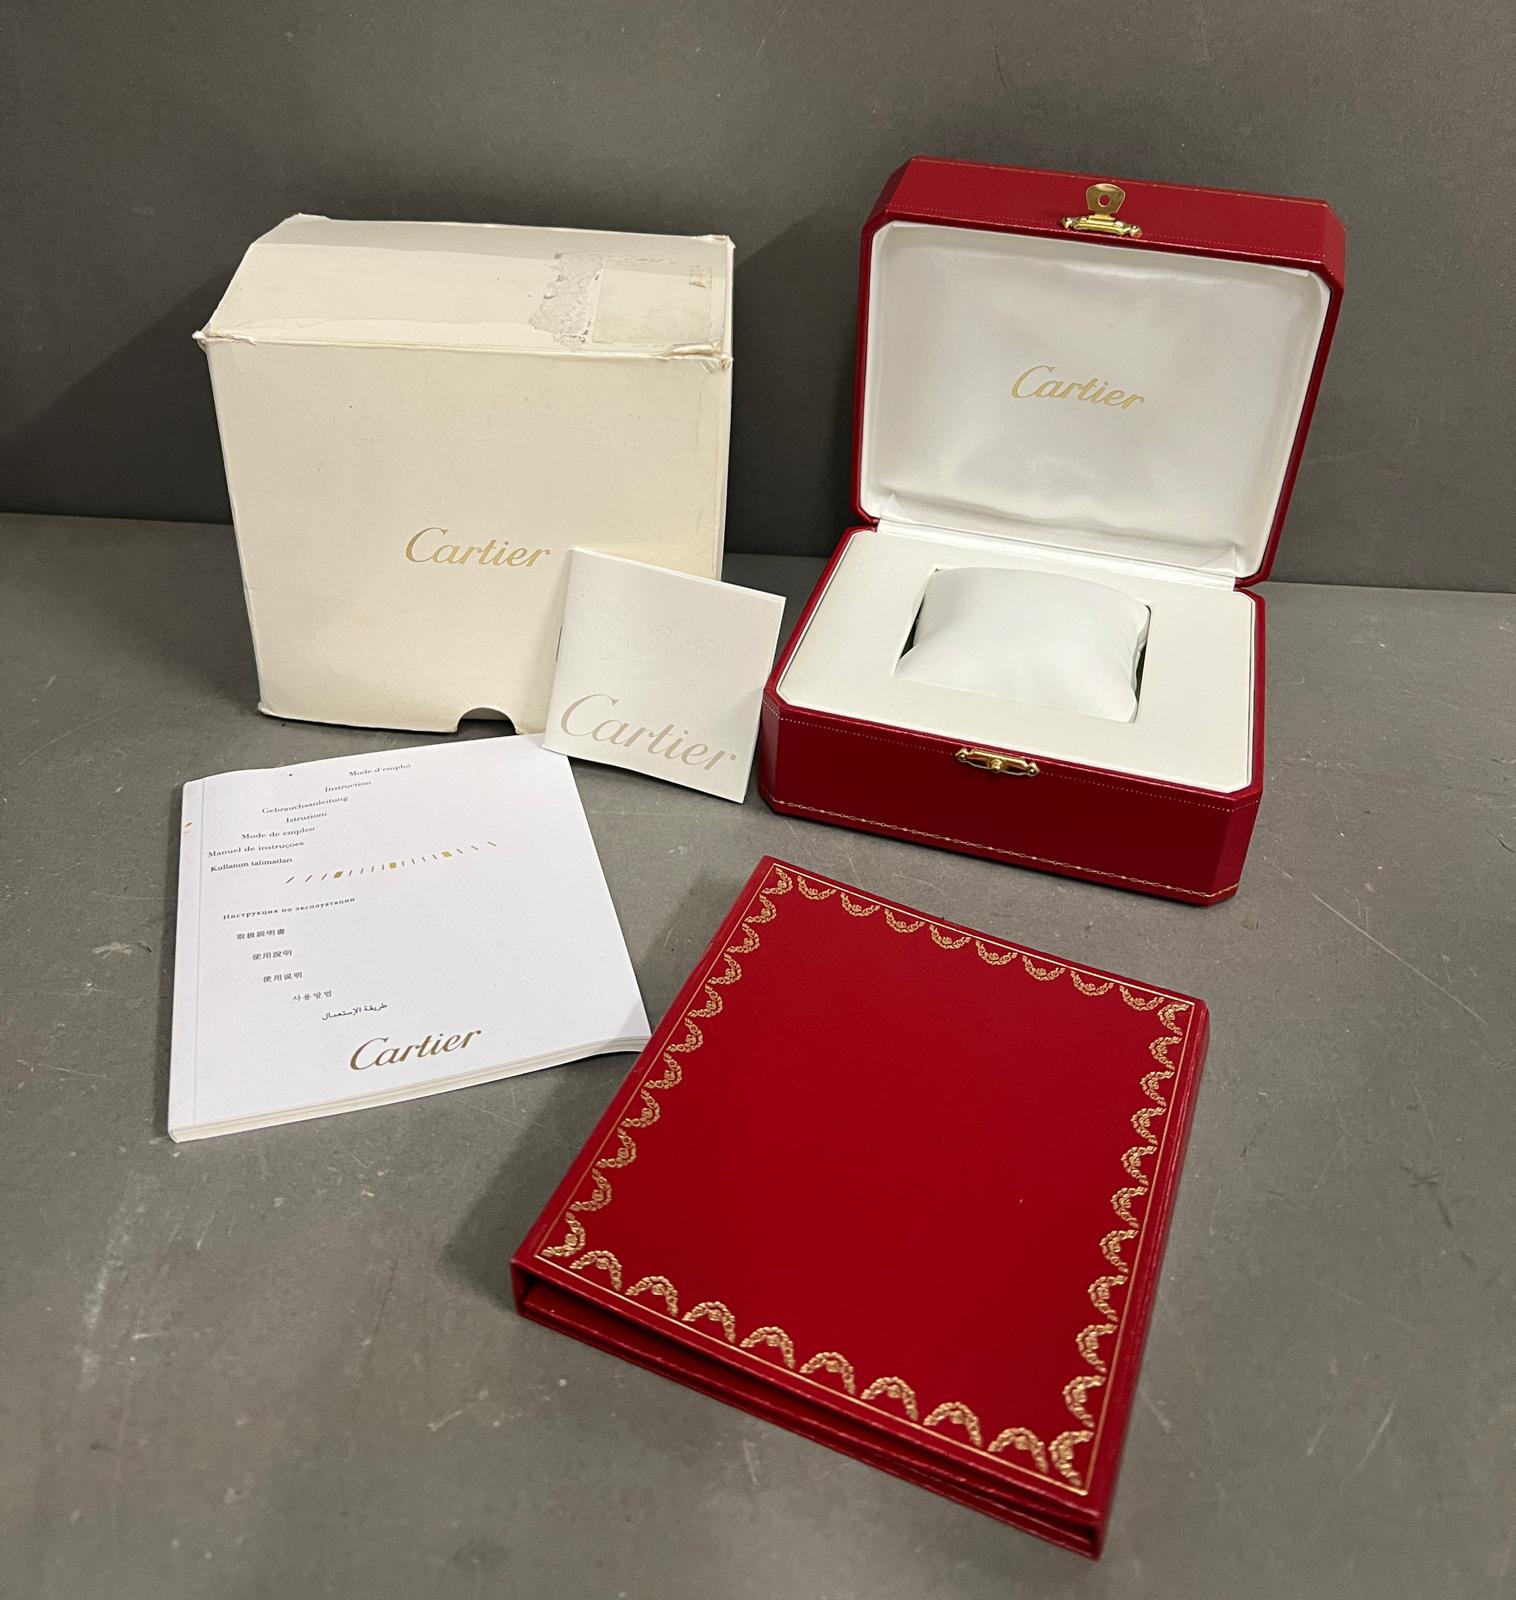 A Cartier watch box with booklet, cd and outer box